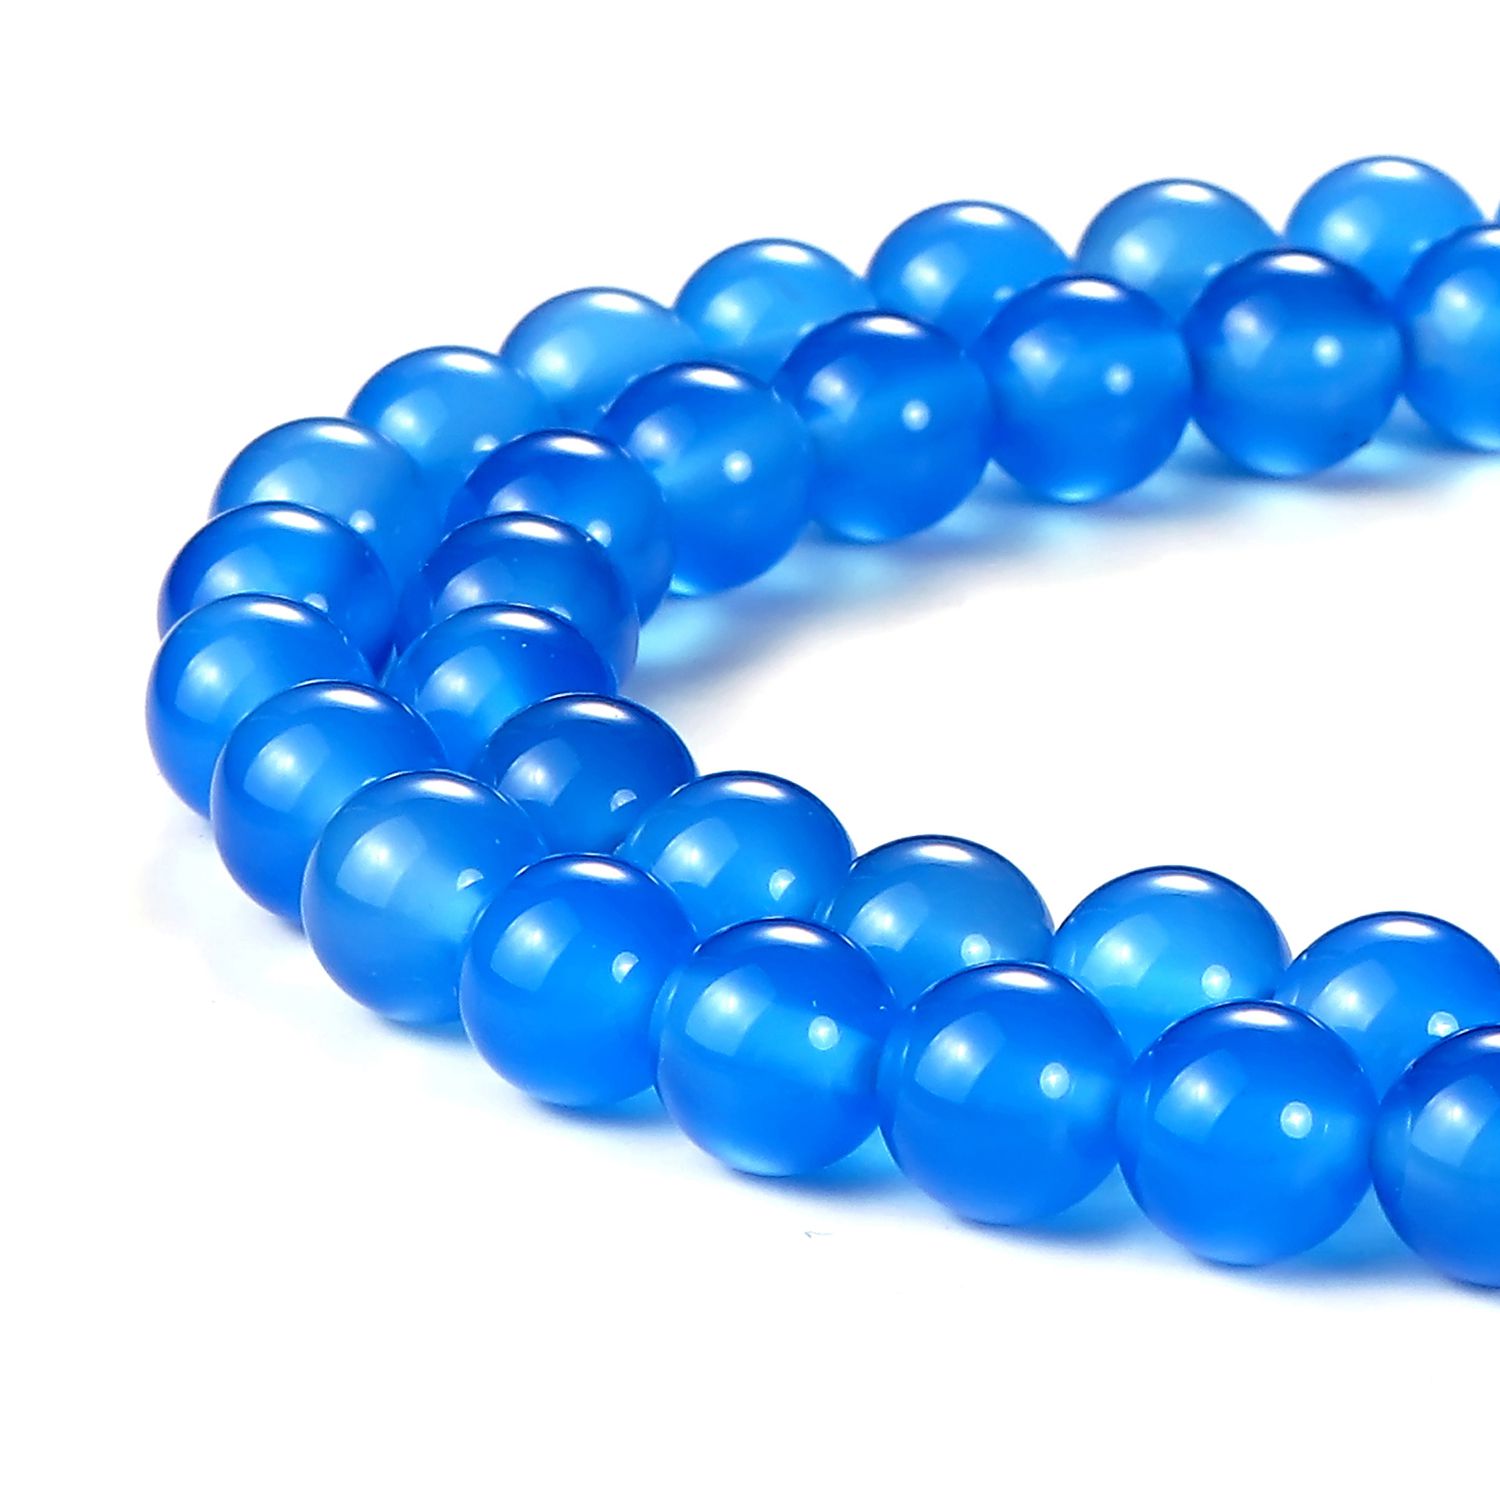 BEADNOVA 8mm Blue Agate Gemstone Round Loose Beads for Jewelry Making ...